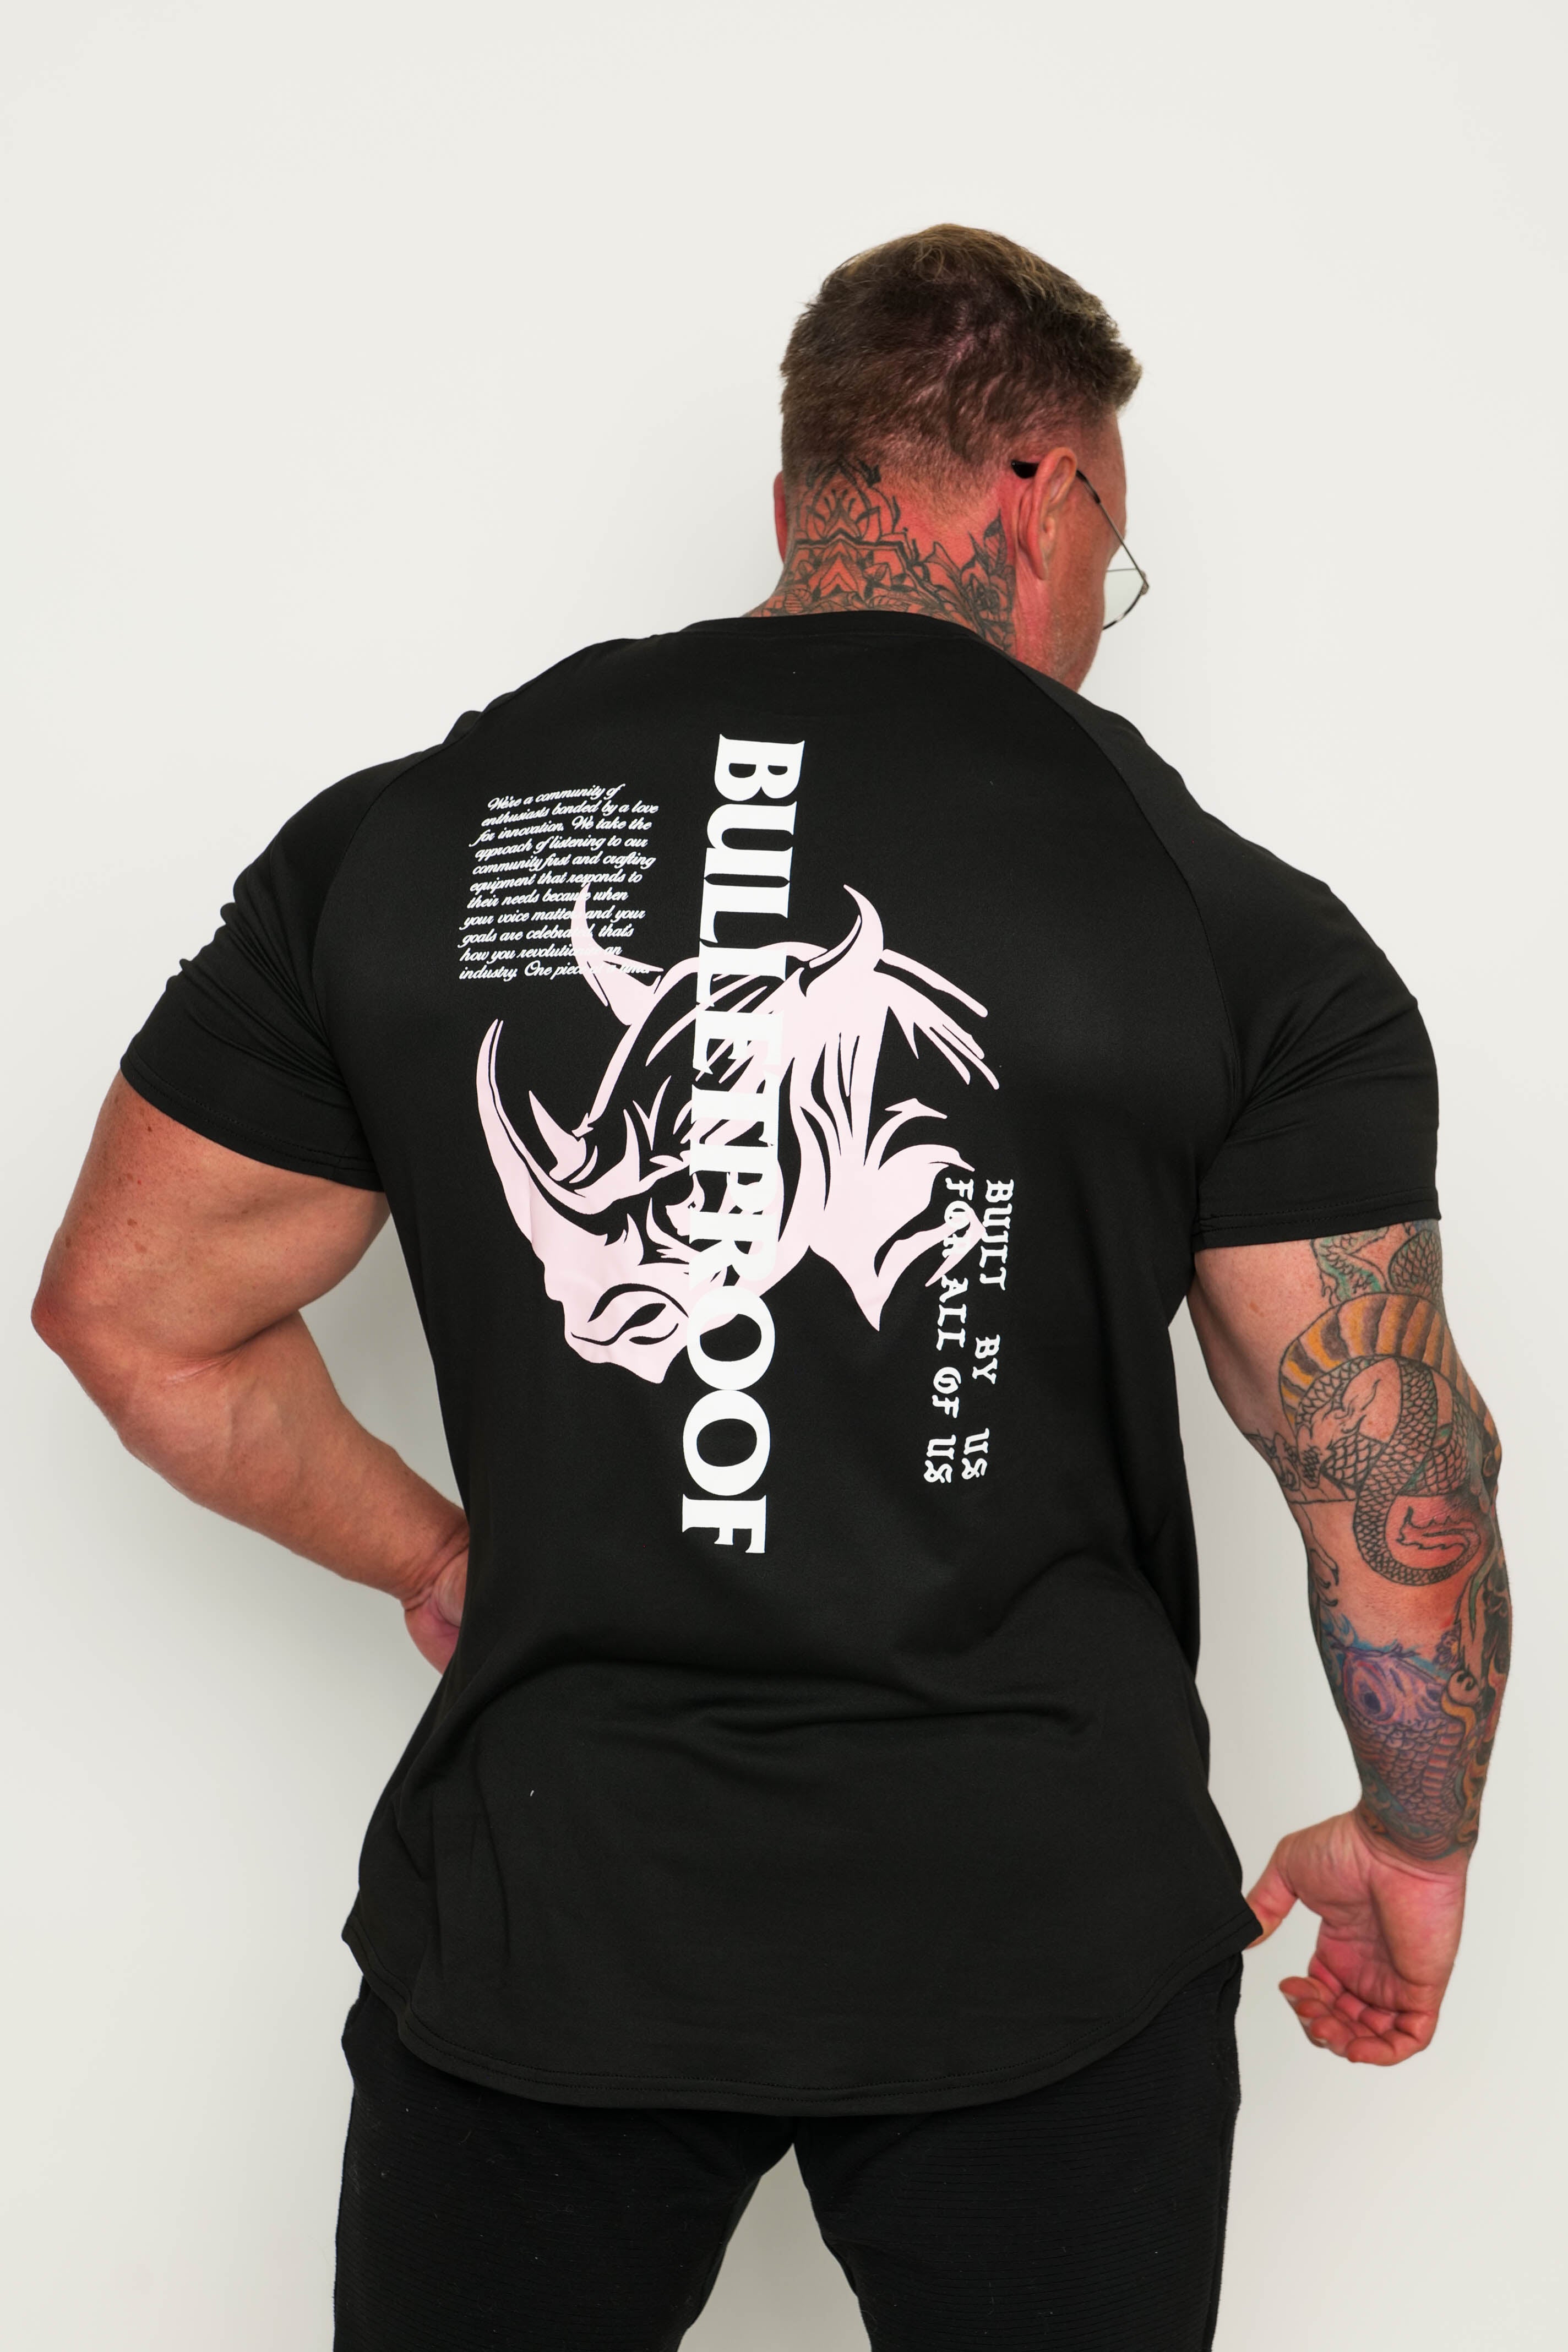 T-SHIRT - Rhino Clan Power Team: Built by Us for Us